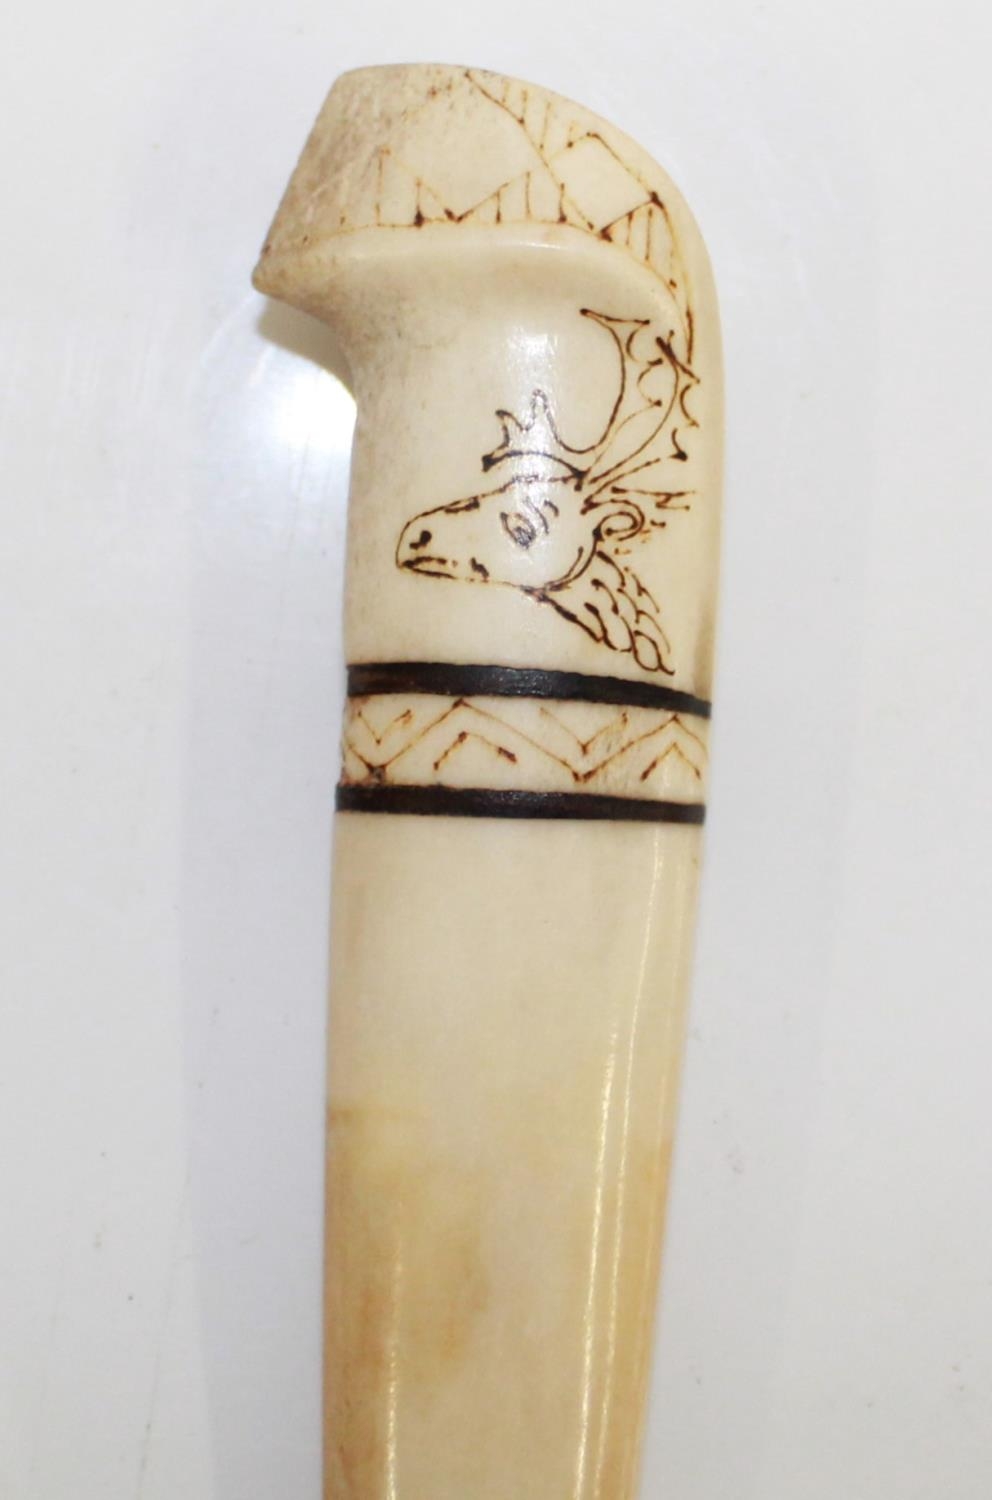 Circa 19th century traditional Lapland Sami Knife, with Reindeer bone handle and sheath, with - Image 4 of 4